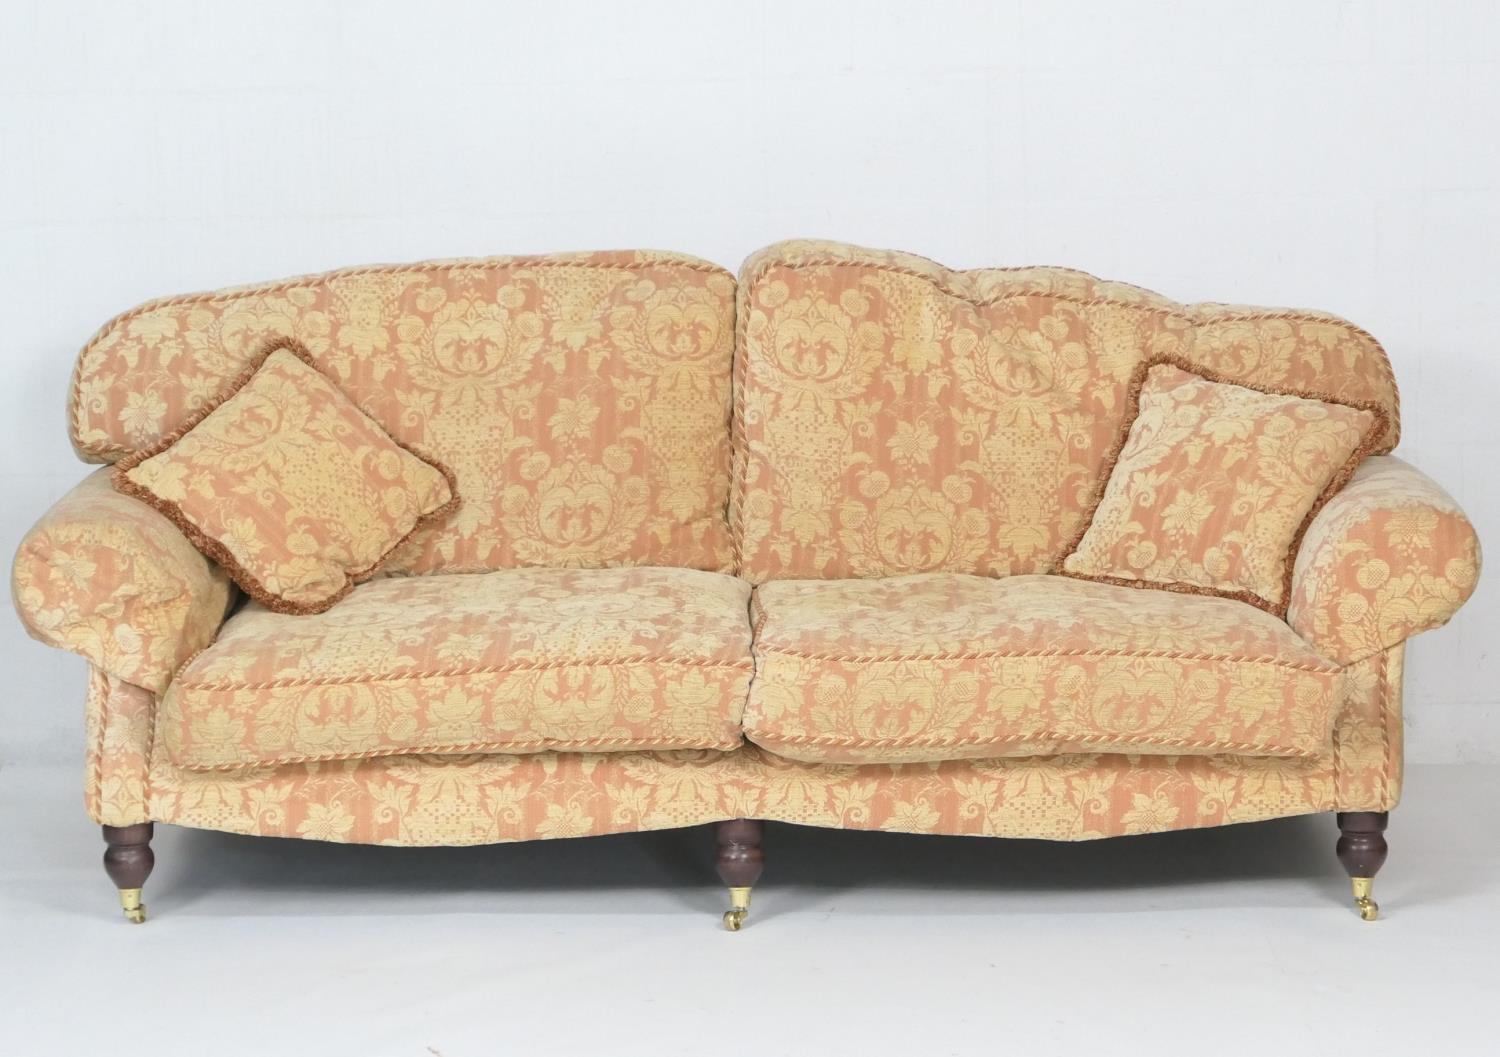 Pembroke Major sofa, circa 2004, upholstered throughout in 'Adagio Rose' figured floral and